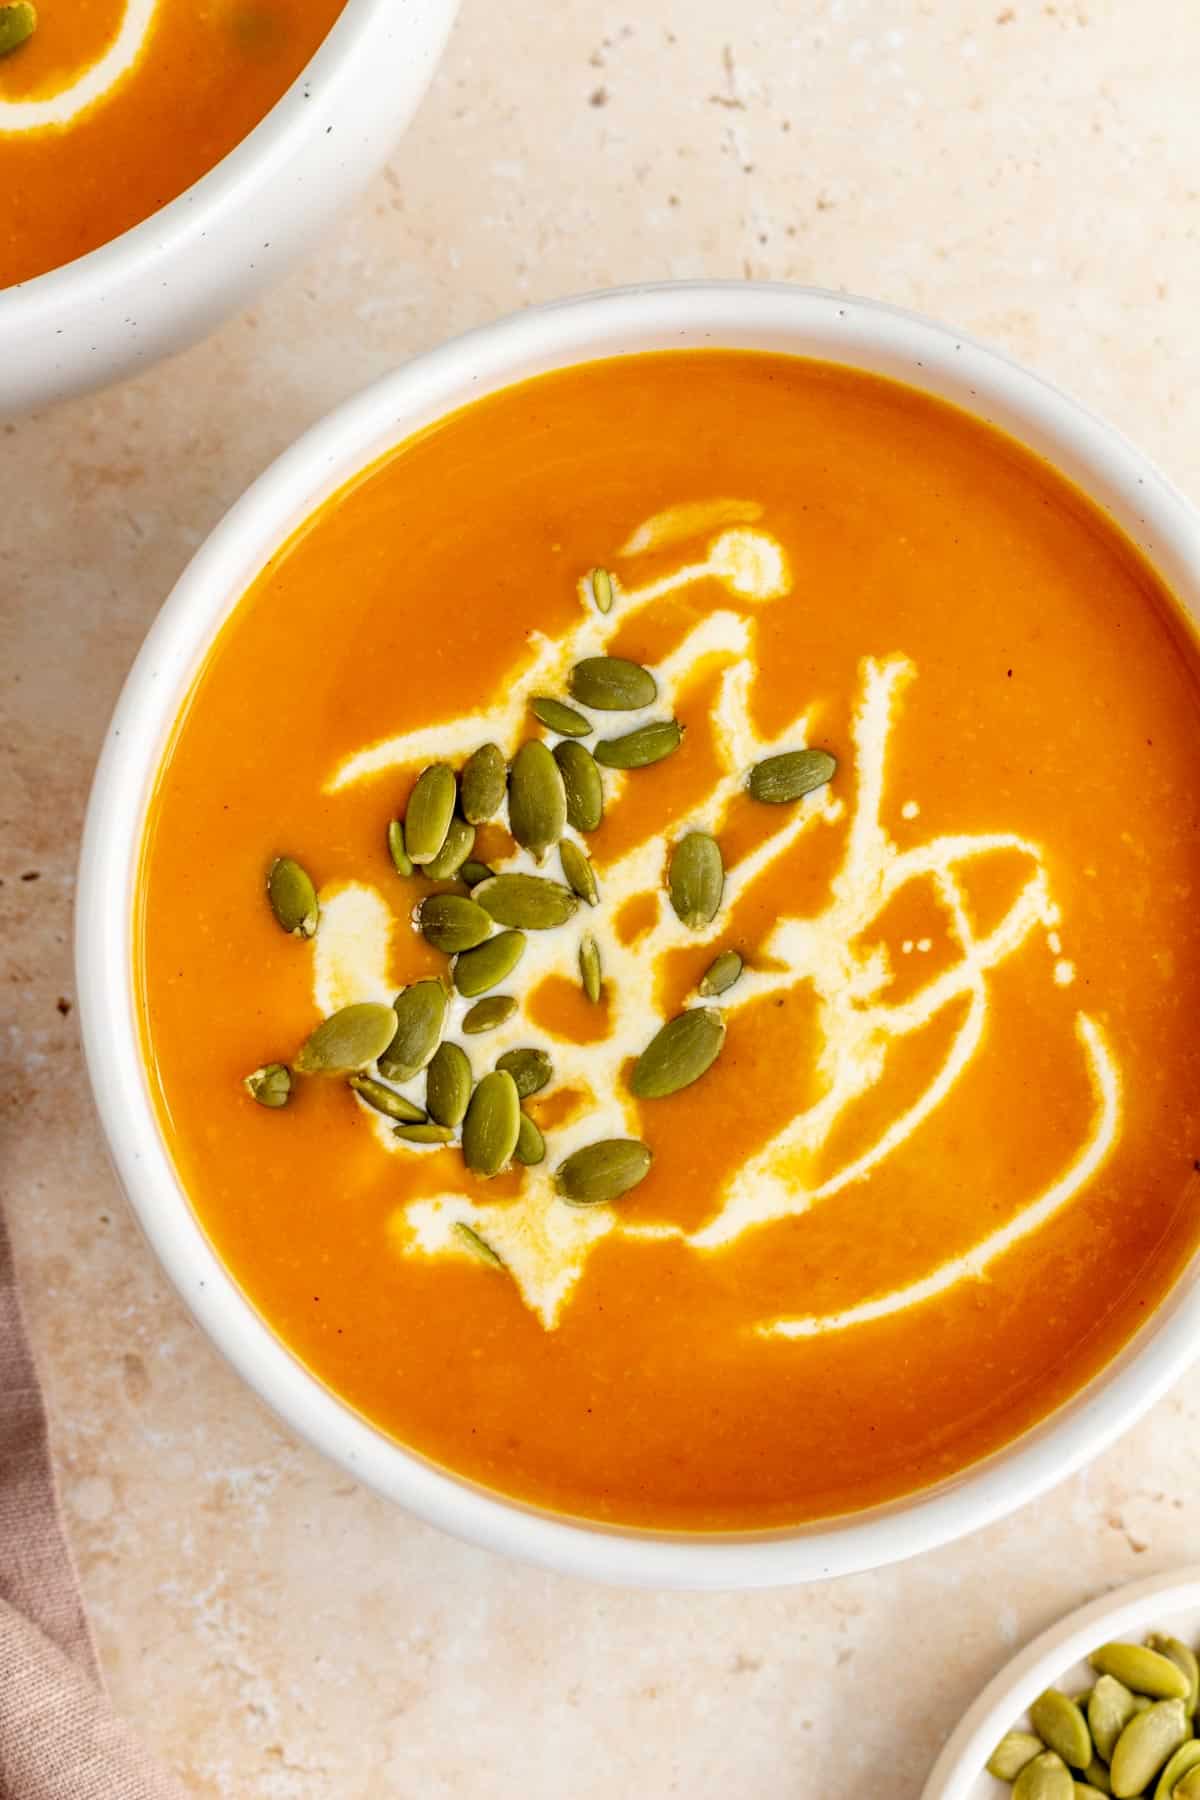 A slightly off centered view of a bowl of sweet potato and pumpkin soup garnished with coconut milk and pumpkin seeds.